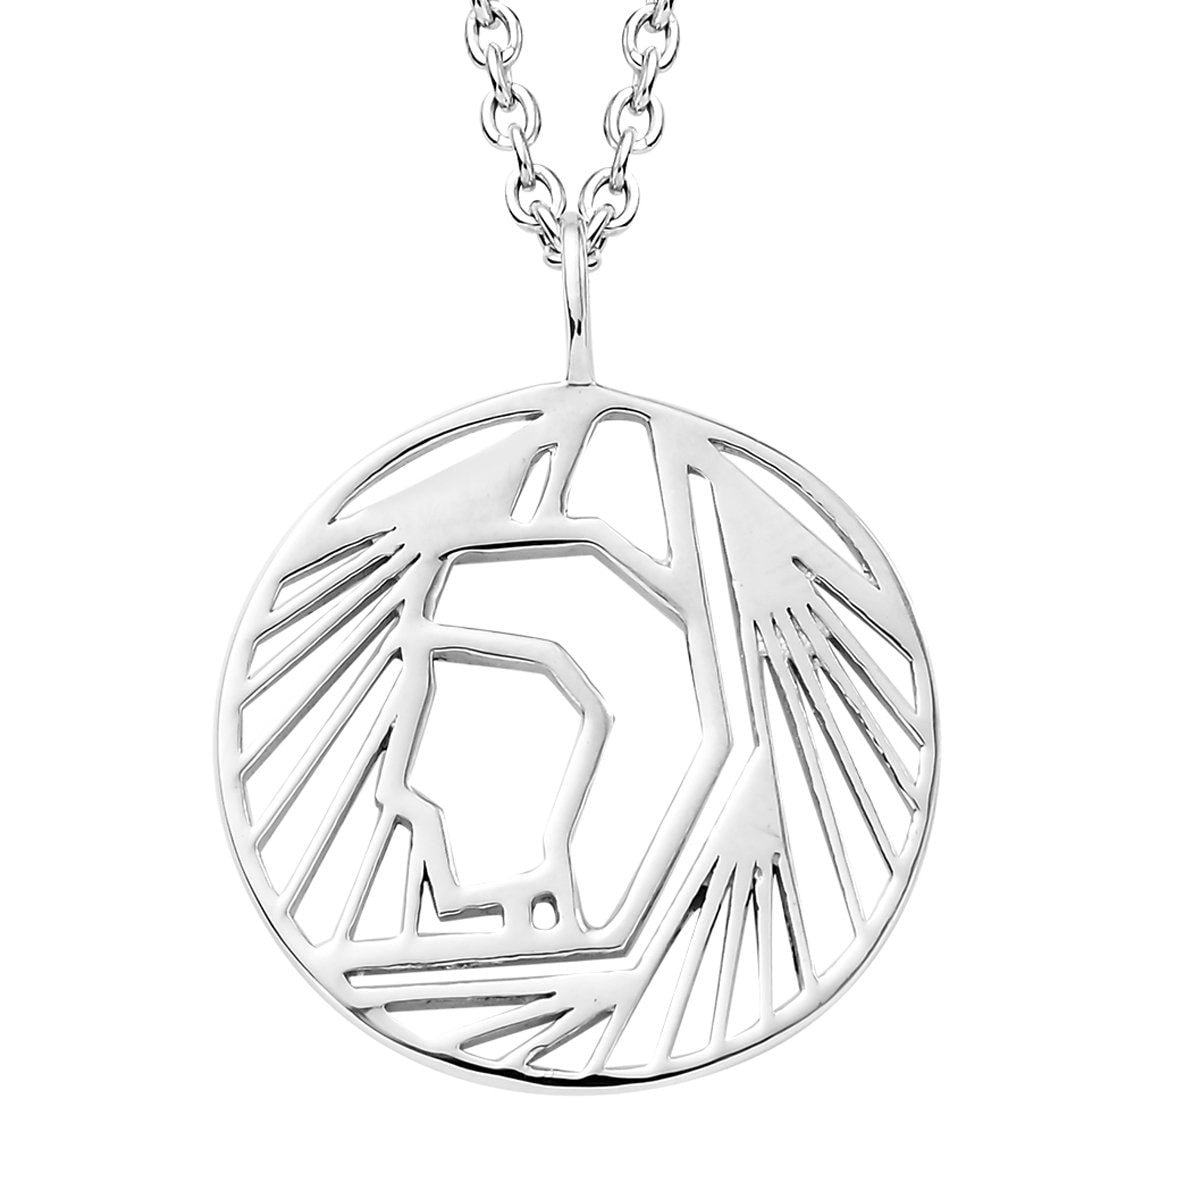 Genuine Leo Zodiac Necklace for Men & Women| Horoscope Astrology Necklace| 925 Silver| Star Sign Necklace| Birthday Gift| Constellation